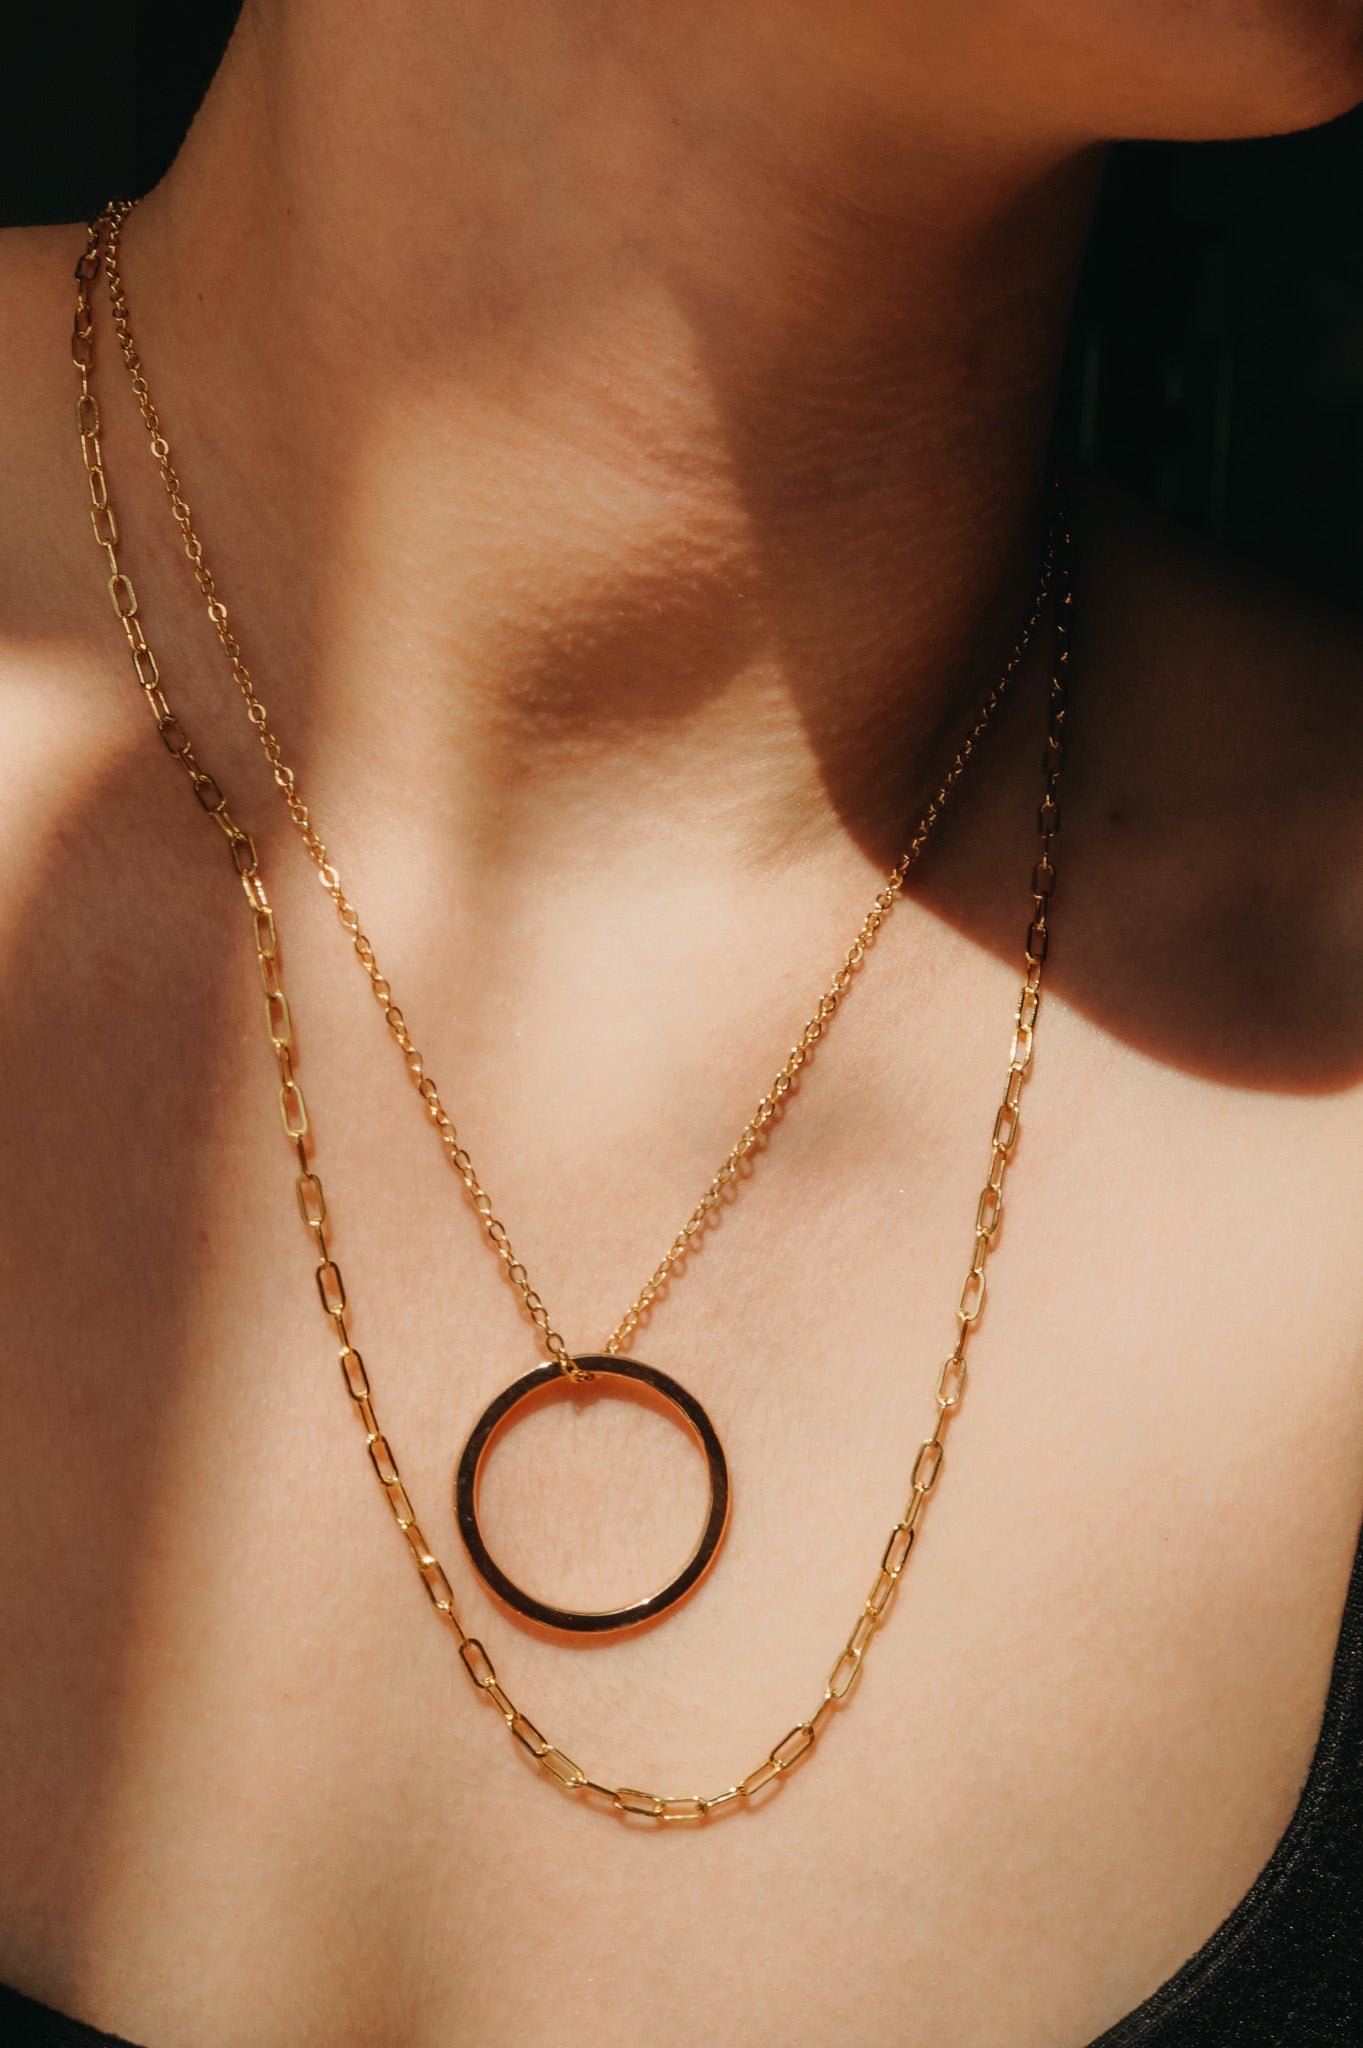 Long Rectangle + Circle Layering Set in Gold Fill, Rose Gold Fill or Sterling Silver